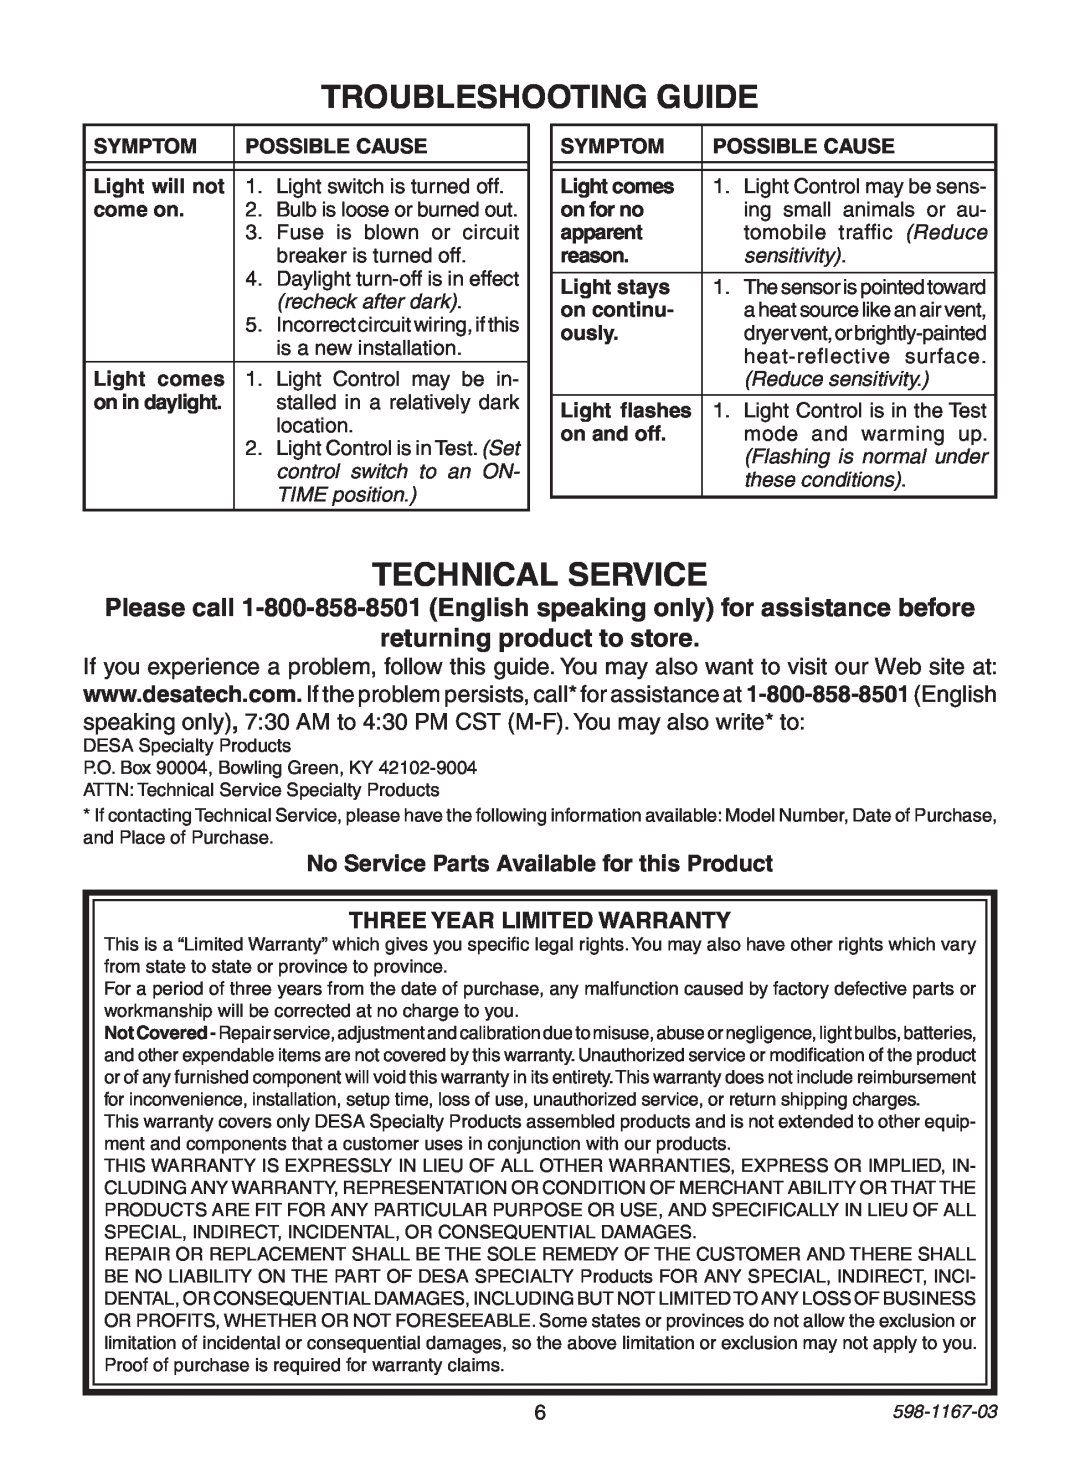 Heath Zenith 4193 Troubleshooting Guide, Technical Service, returning product to store, Three Year Limited Warranty, ously 